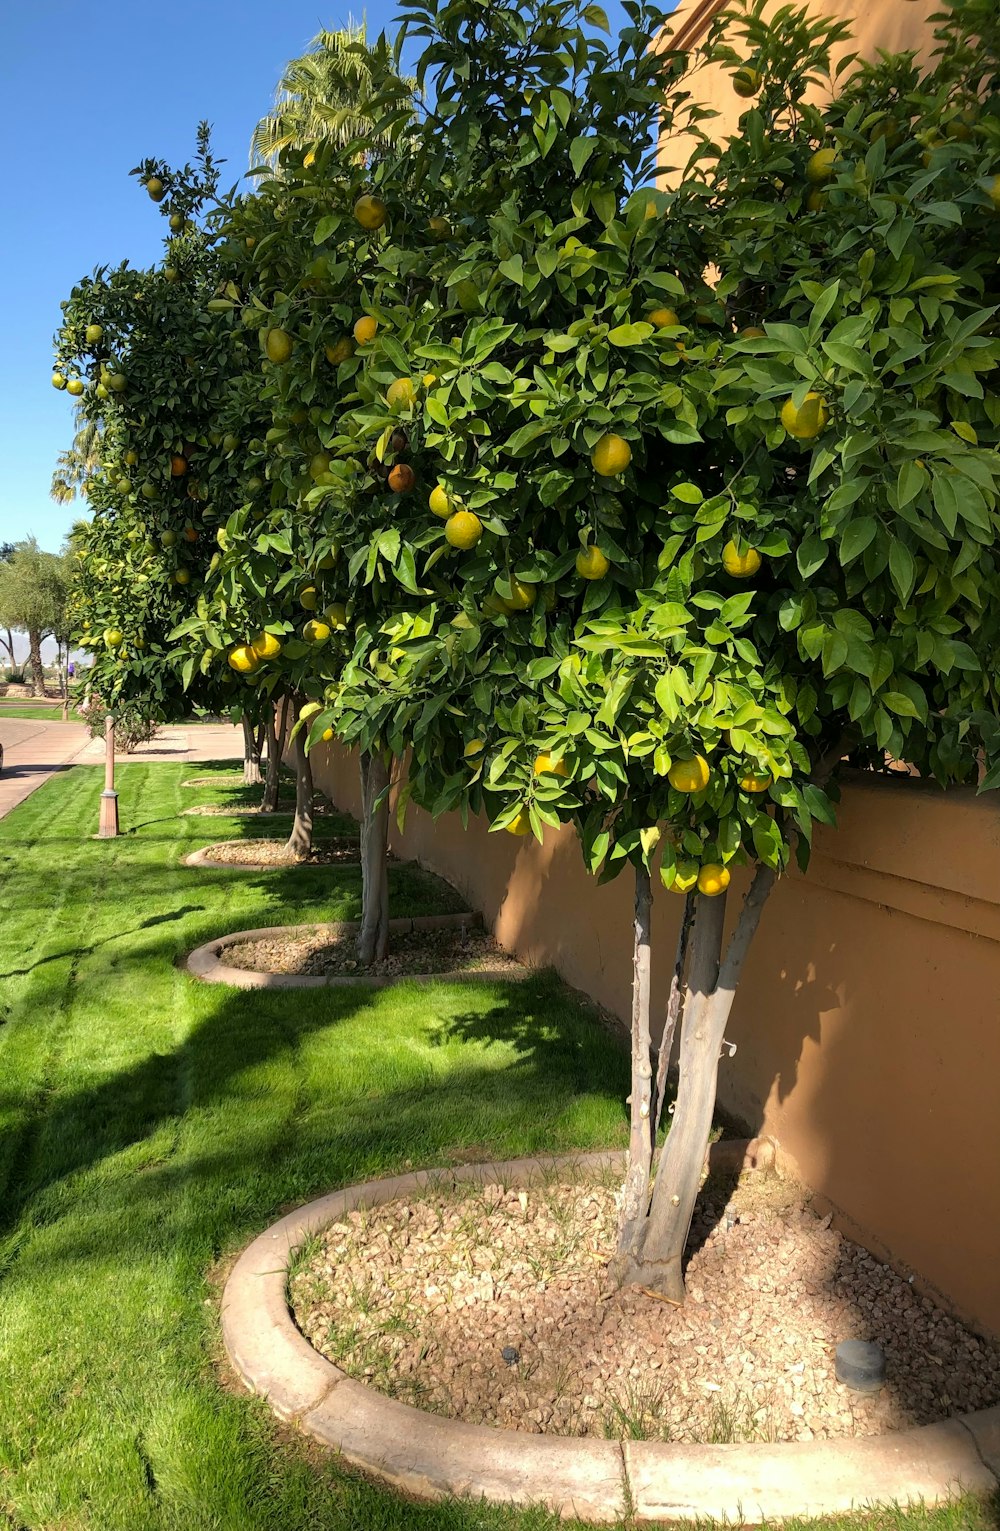 a row of orange trees with oranges growing on them